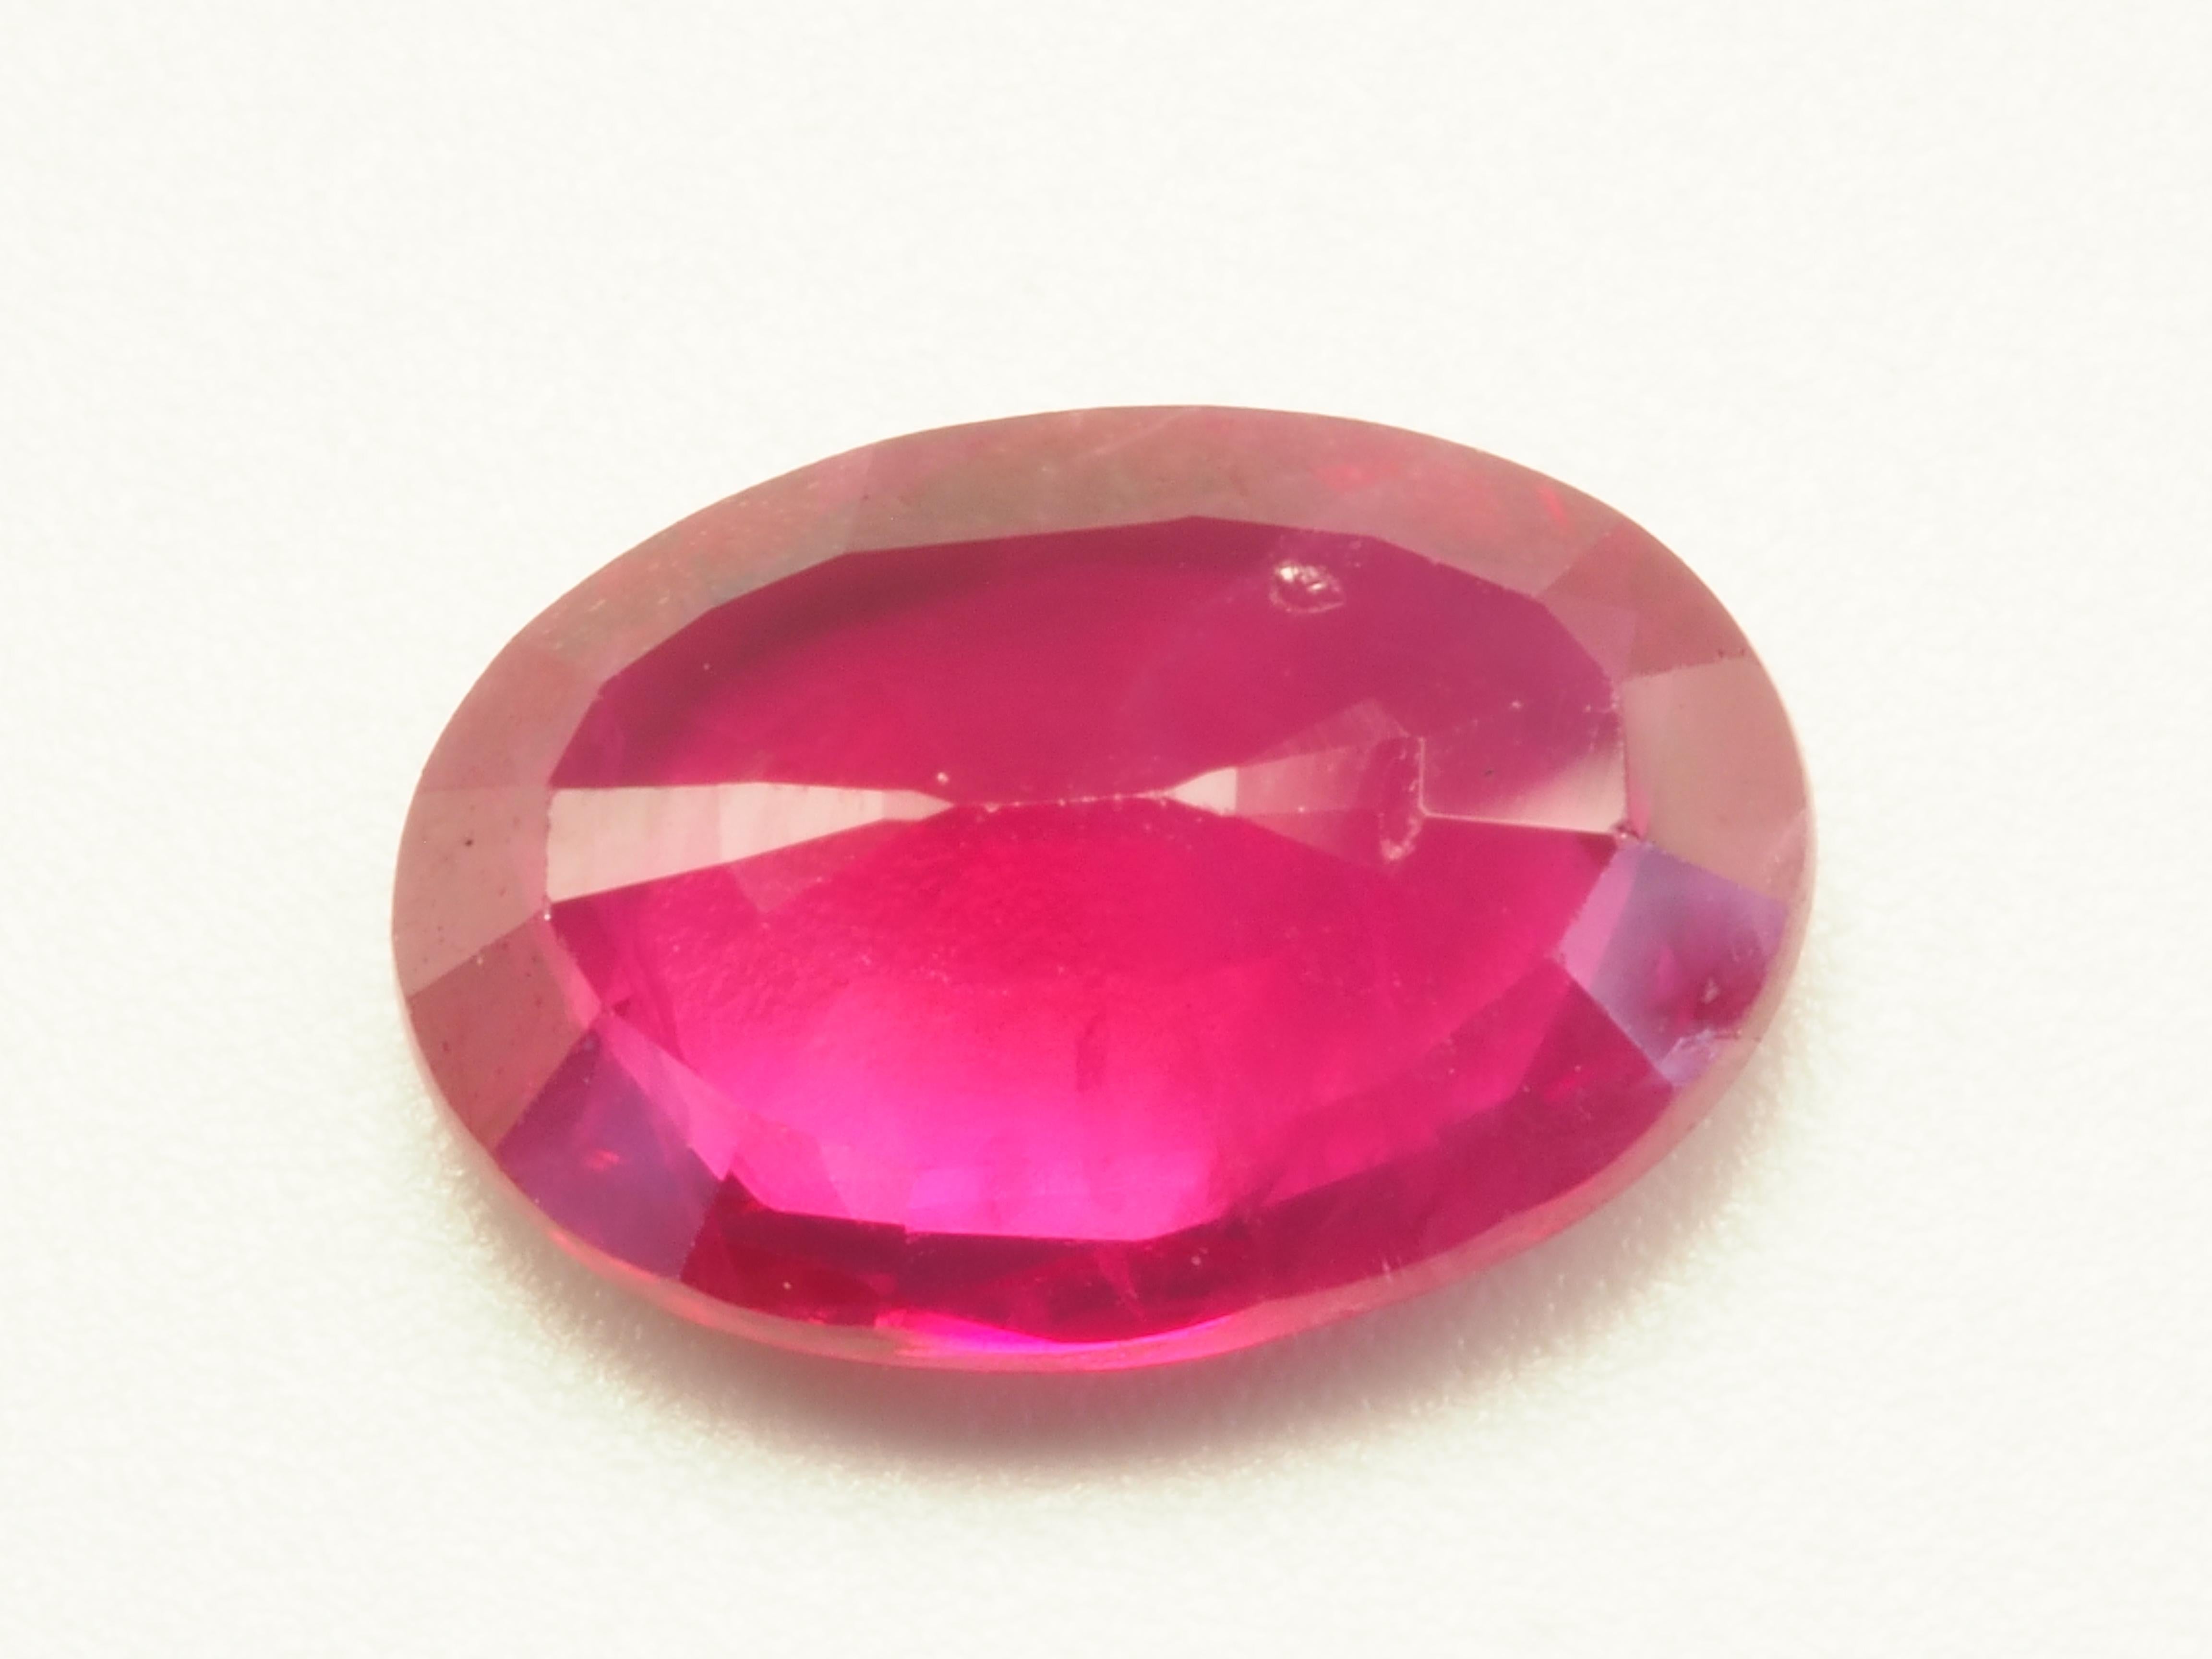 AIGS Certified 2.05ct Pinkish-Red Oval Ruby, 9.55x6.78x3.39 mm For Sale 2